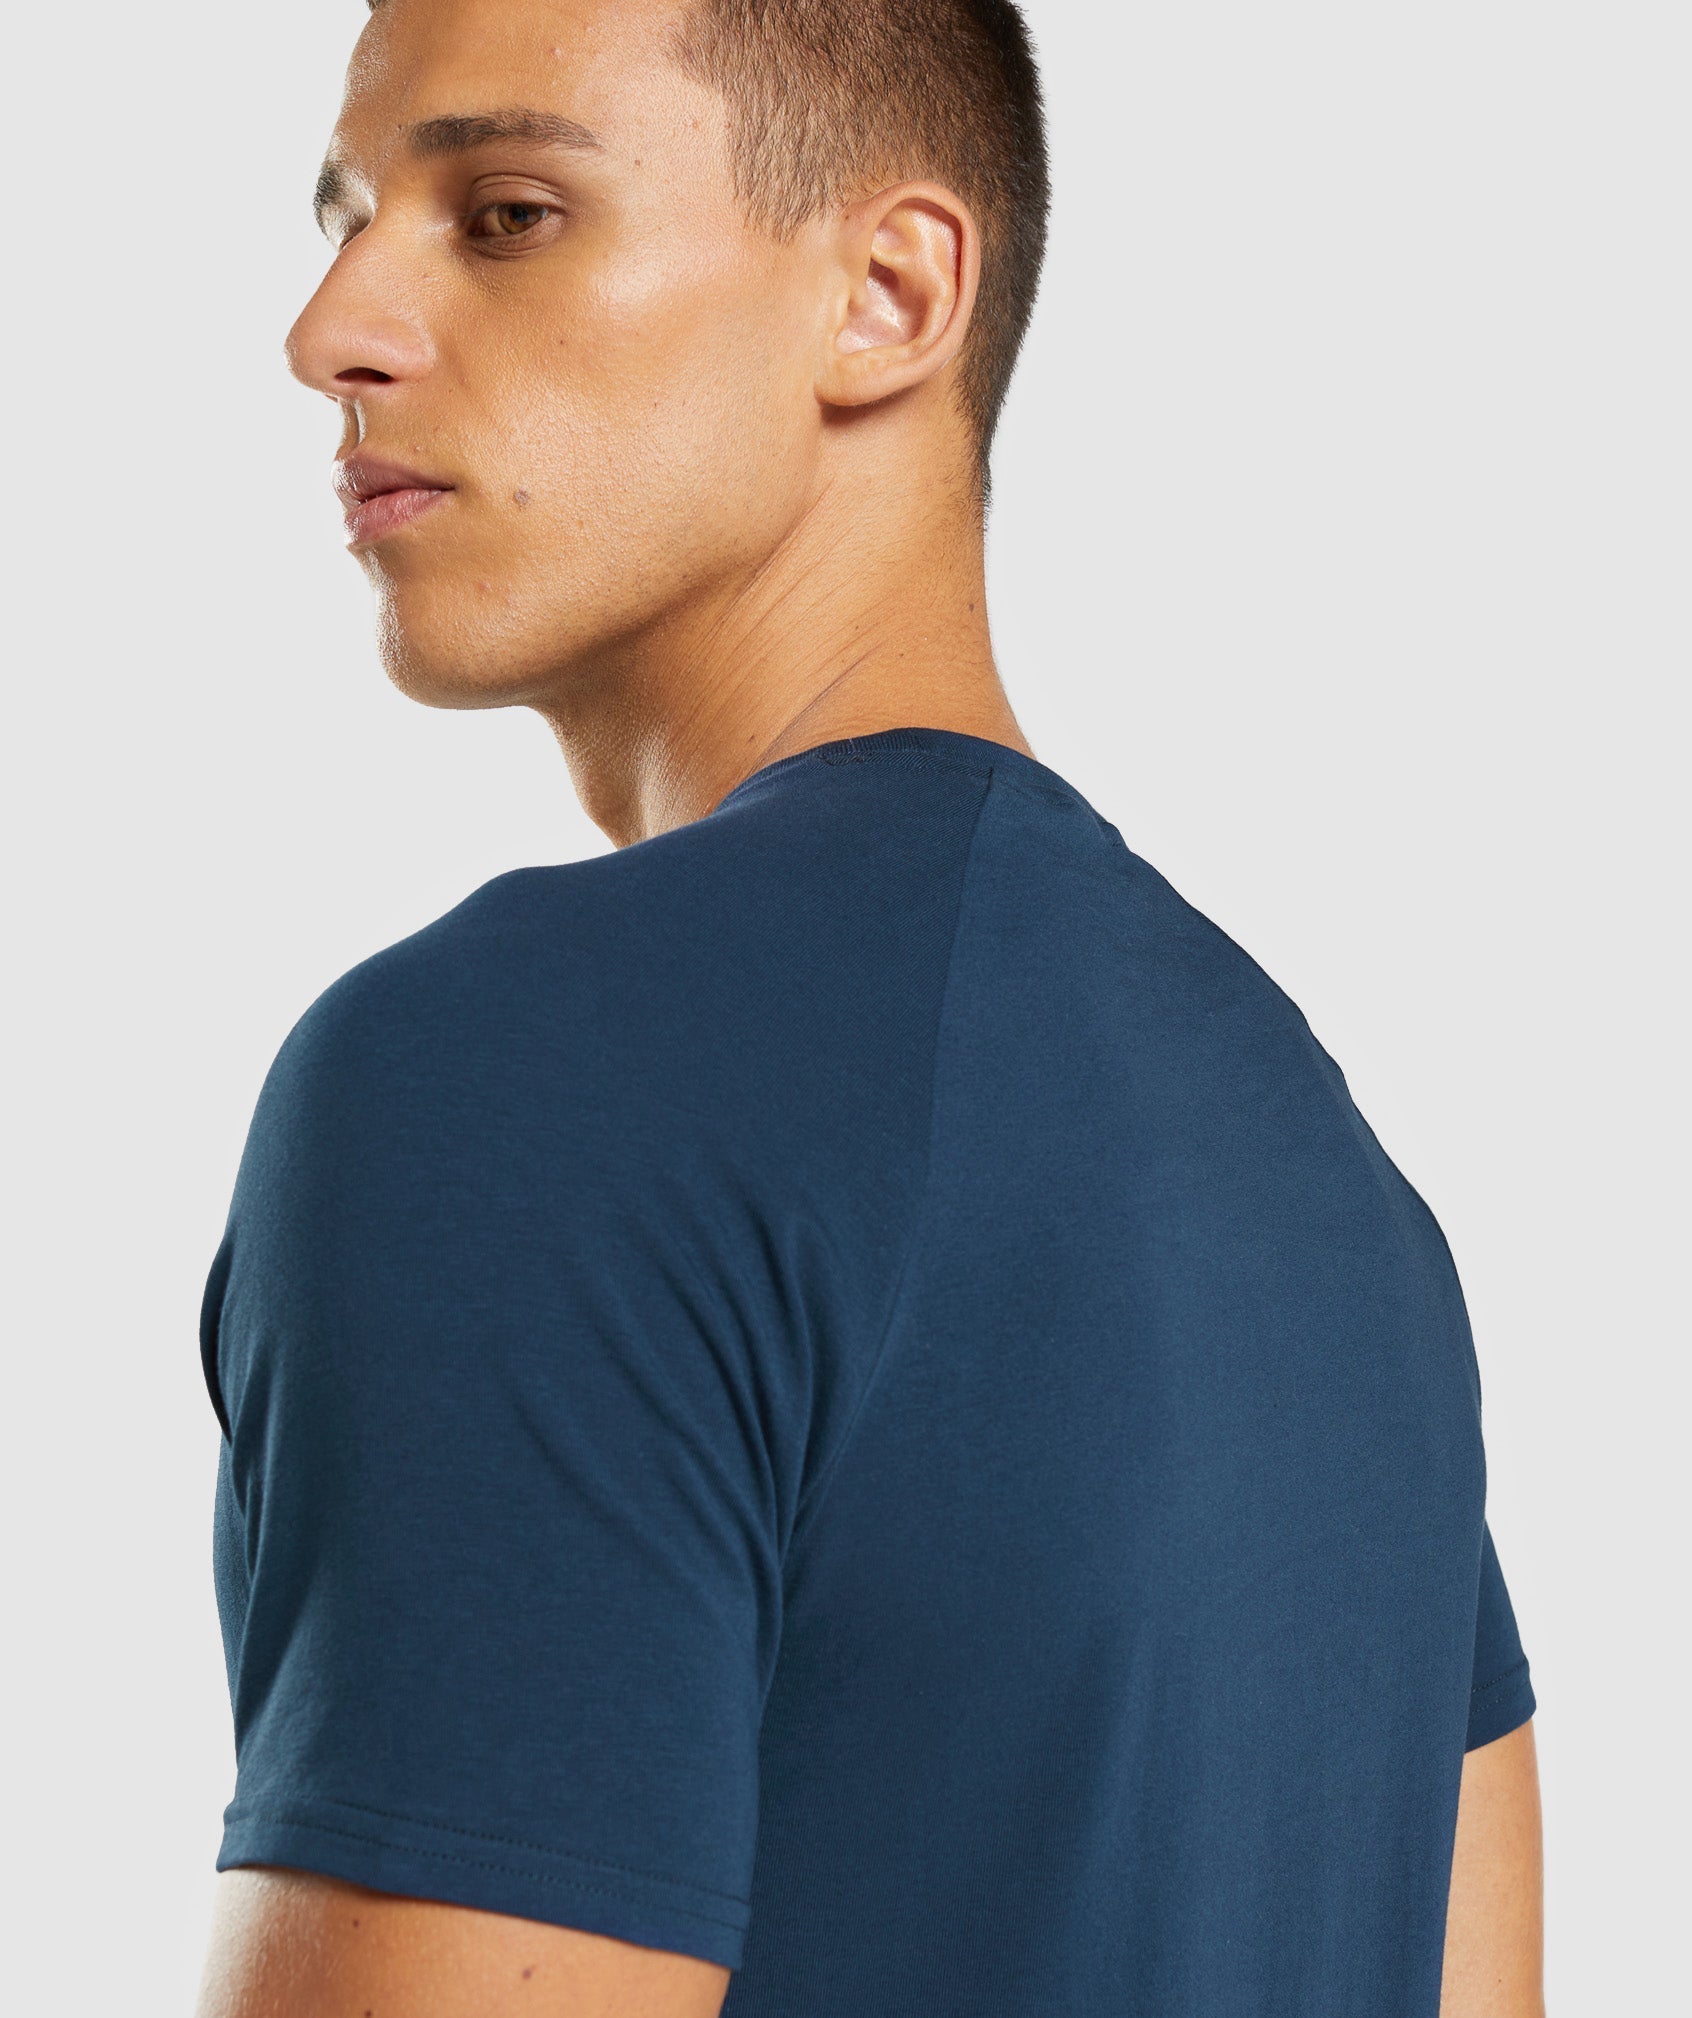 Apollo T-Shirt in Navy - view 7